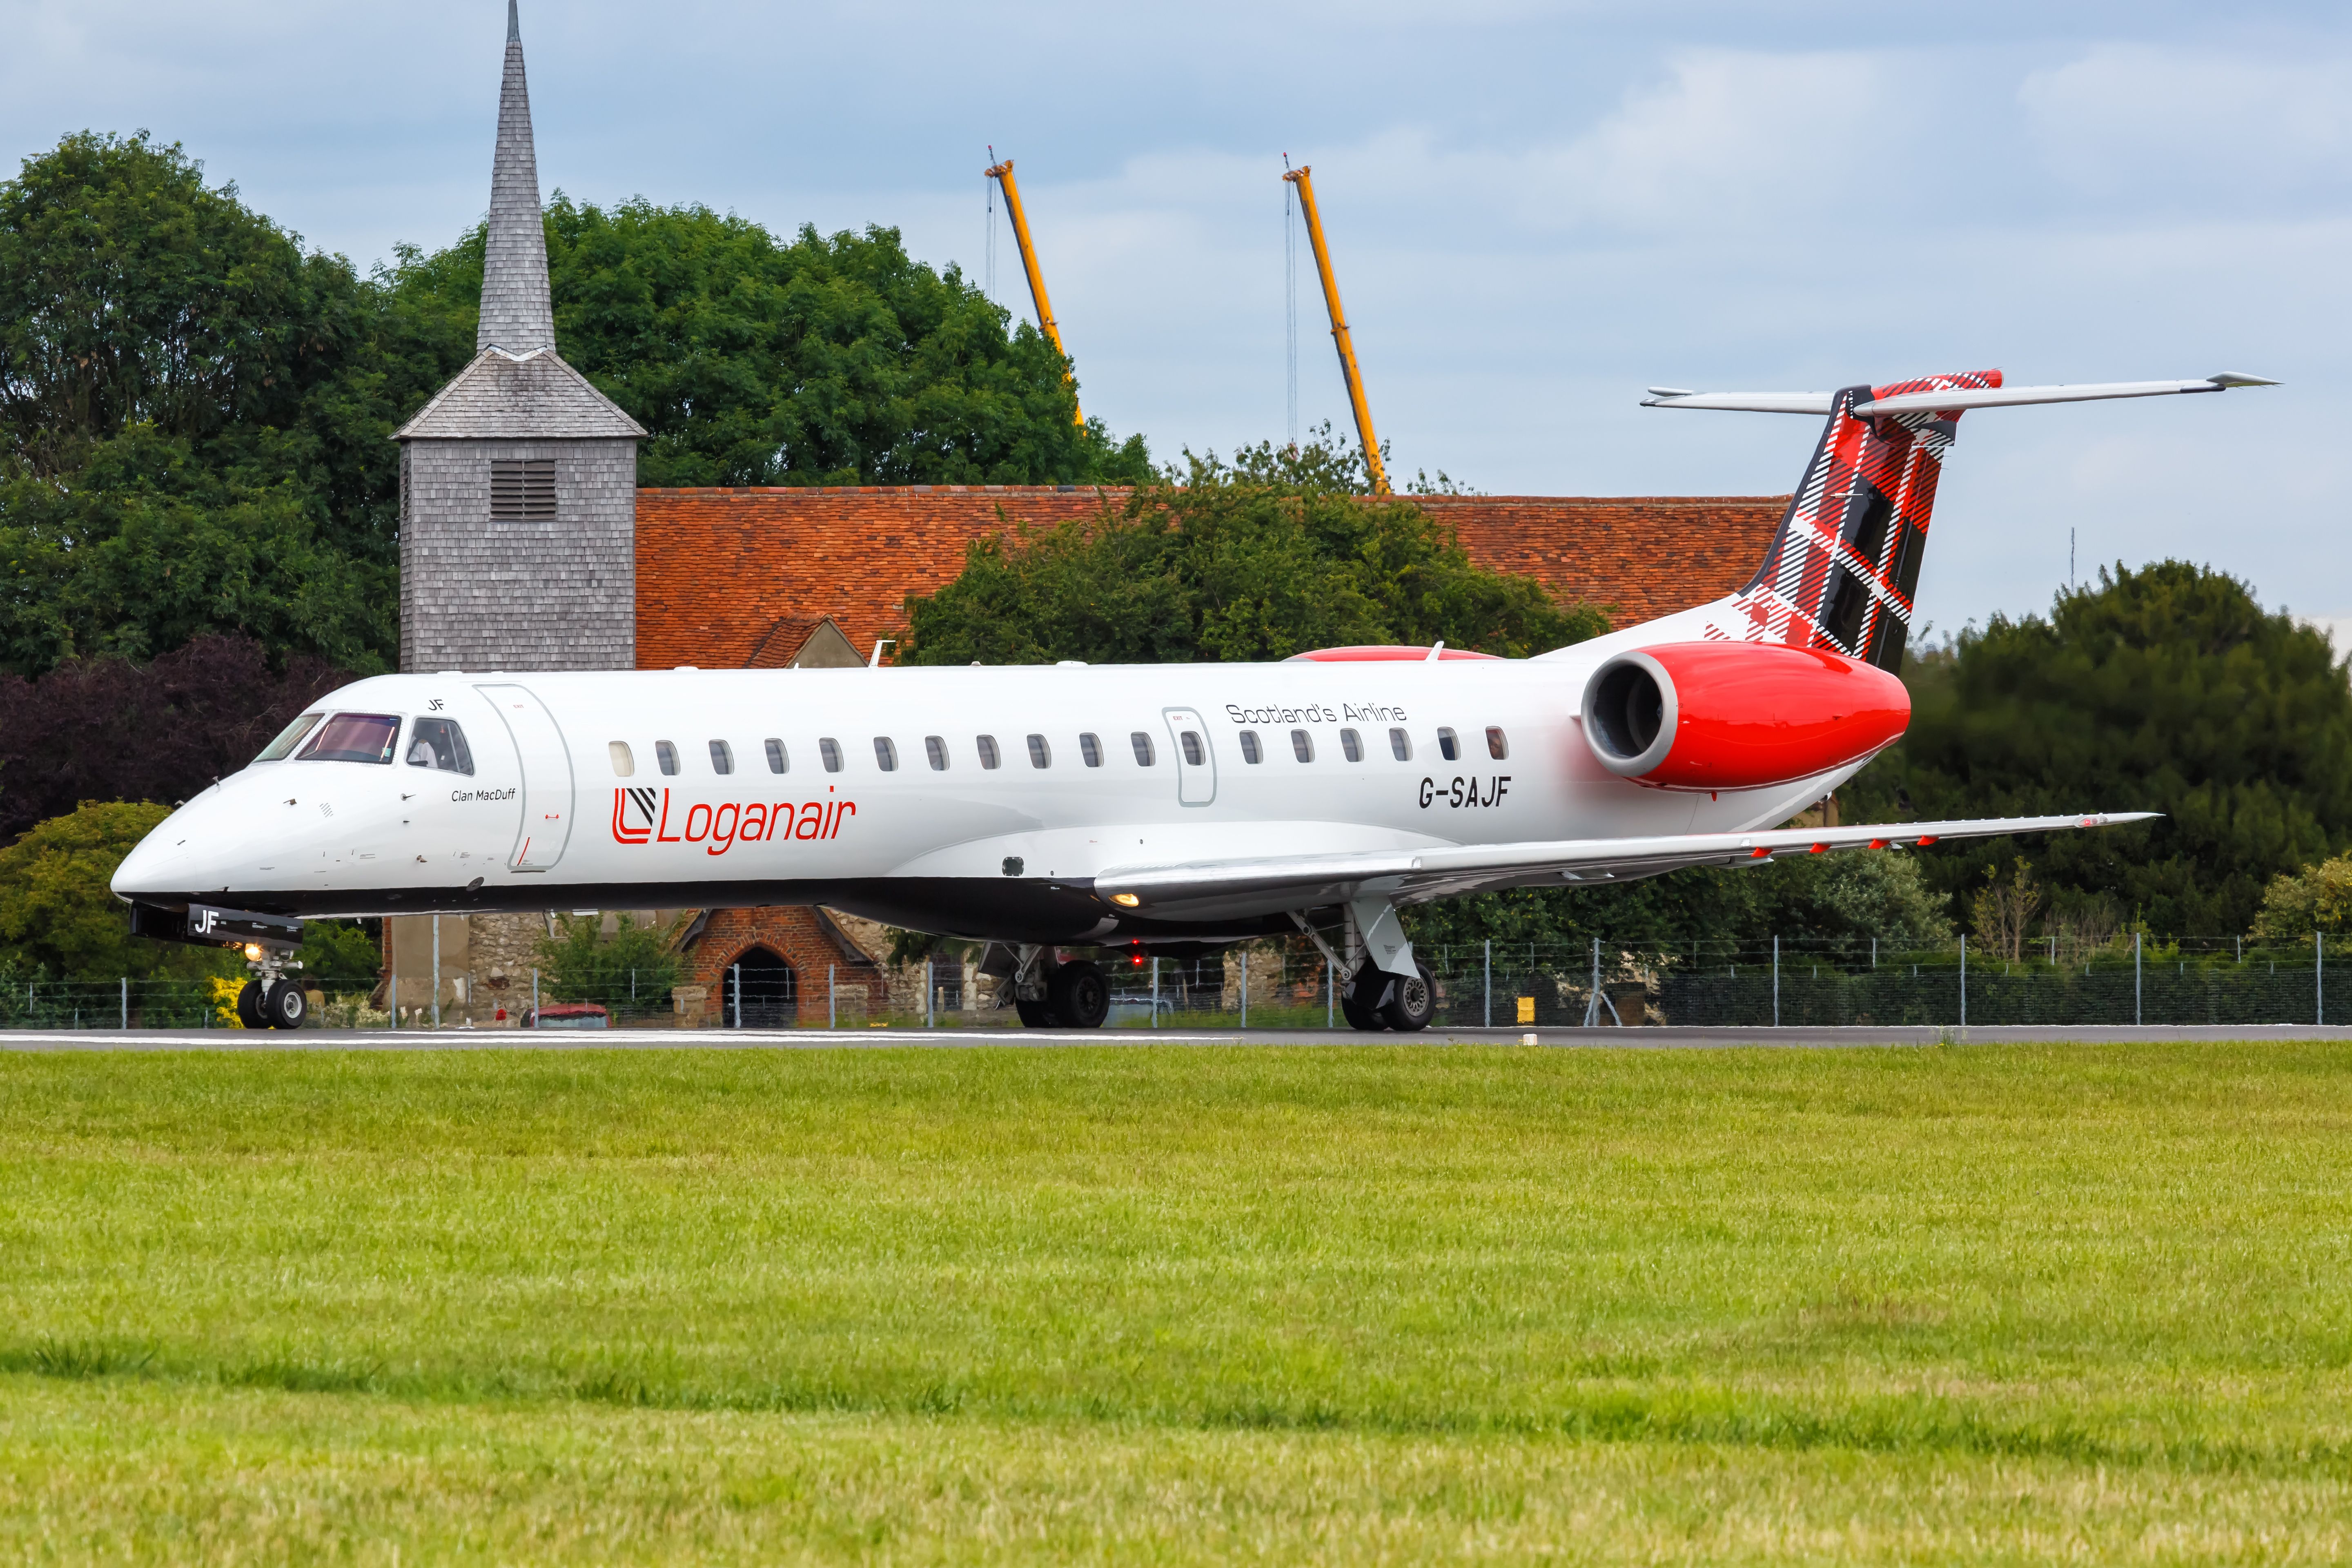 Loganair offer regional connections across the UK